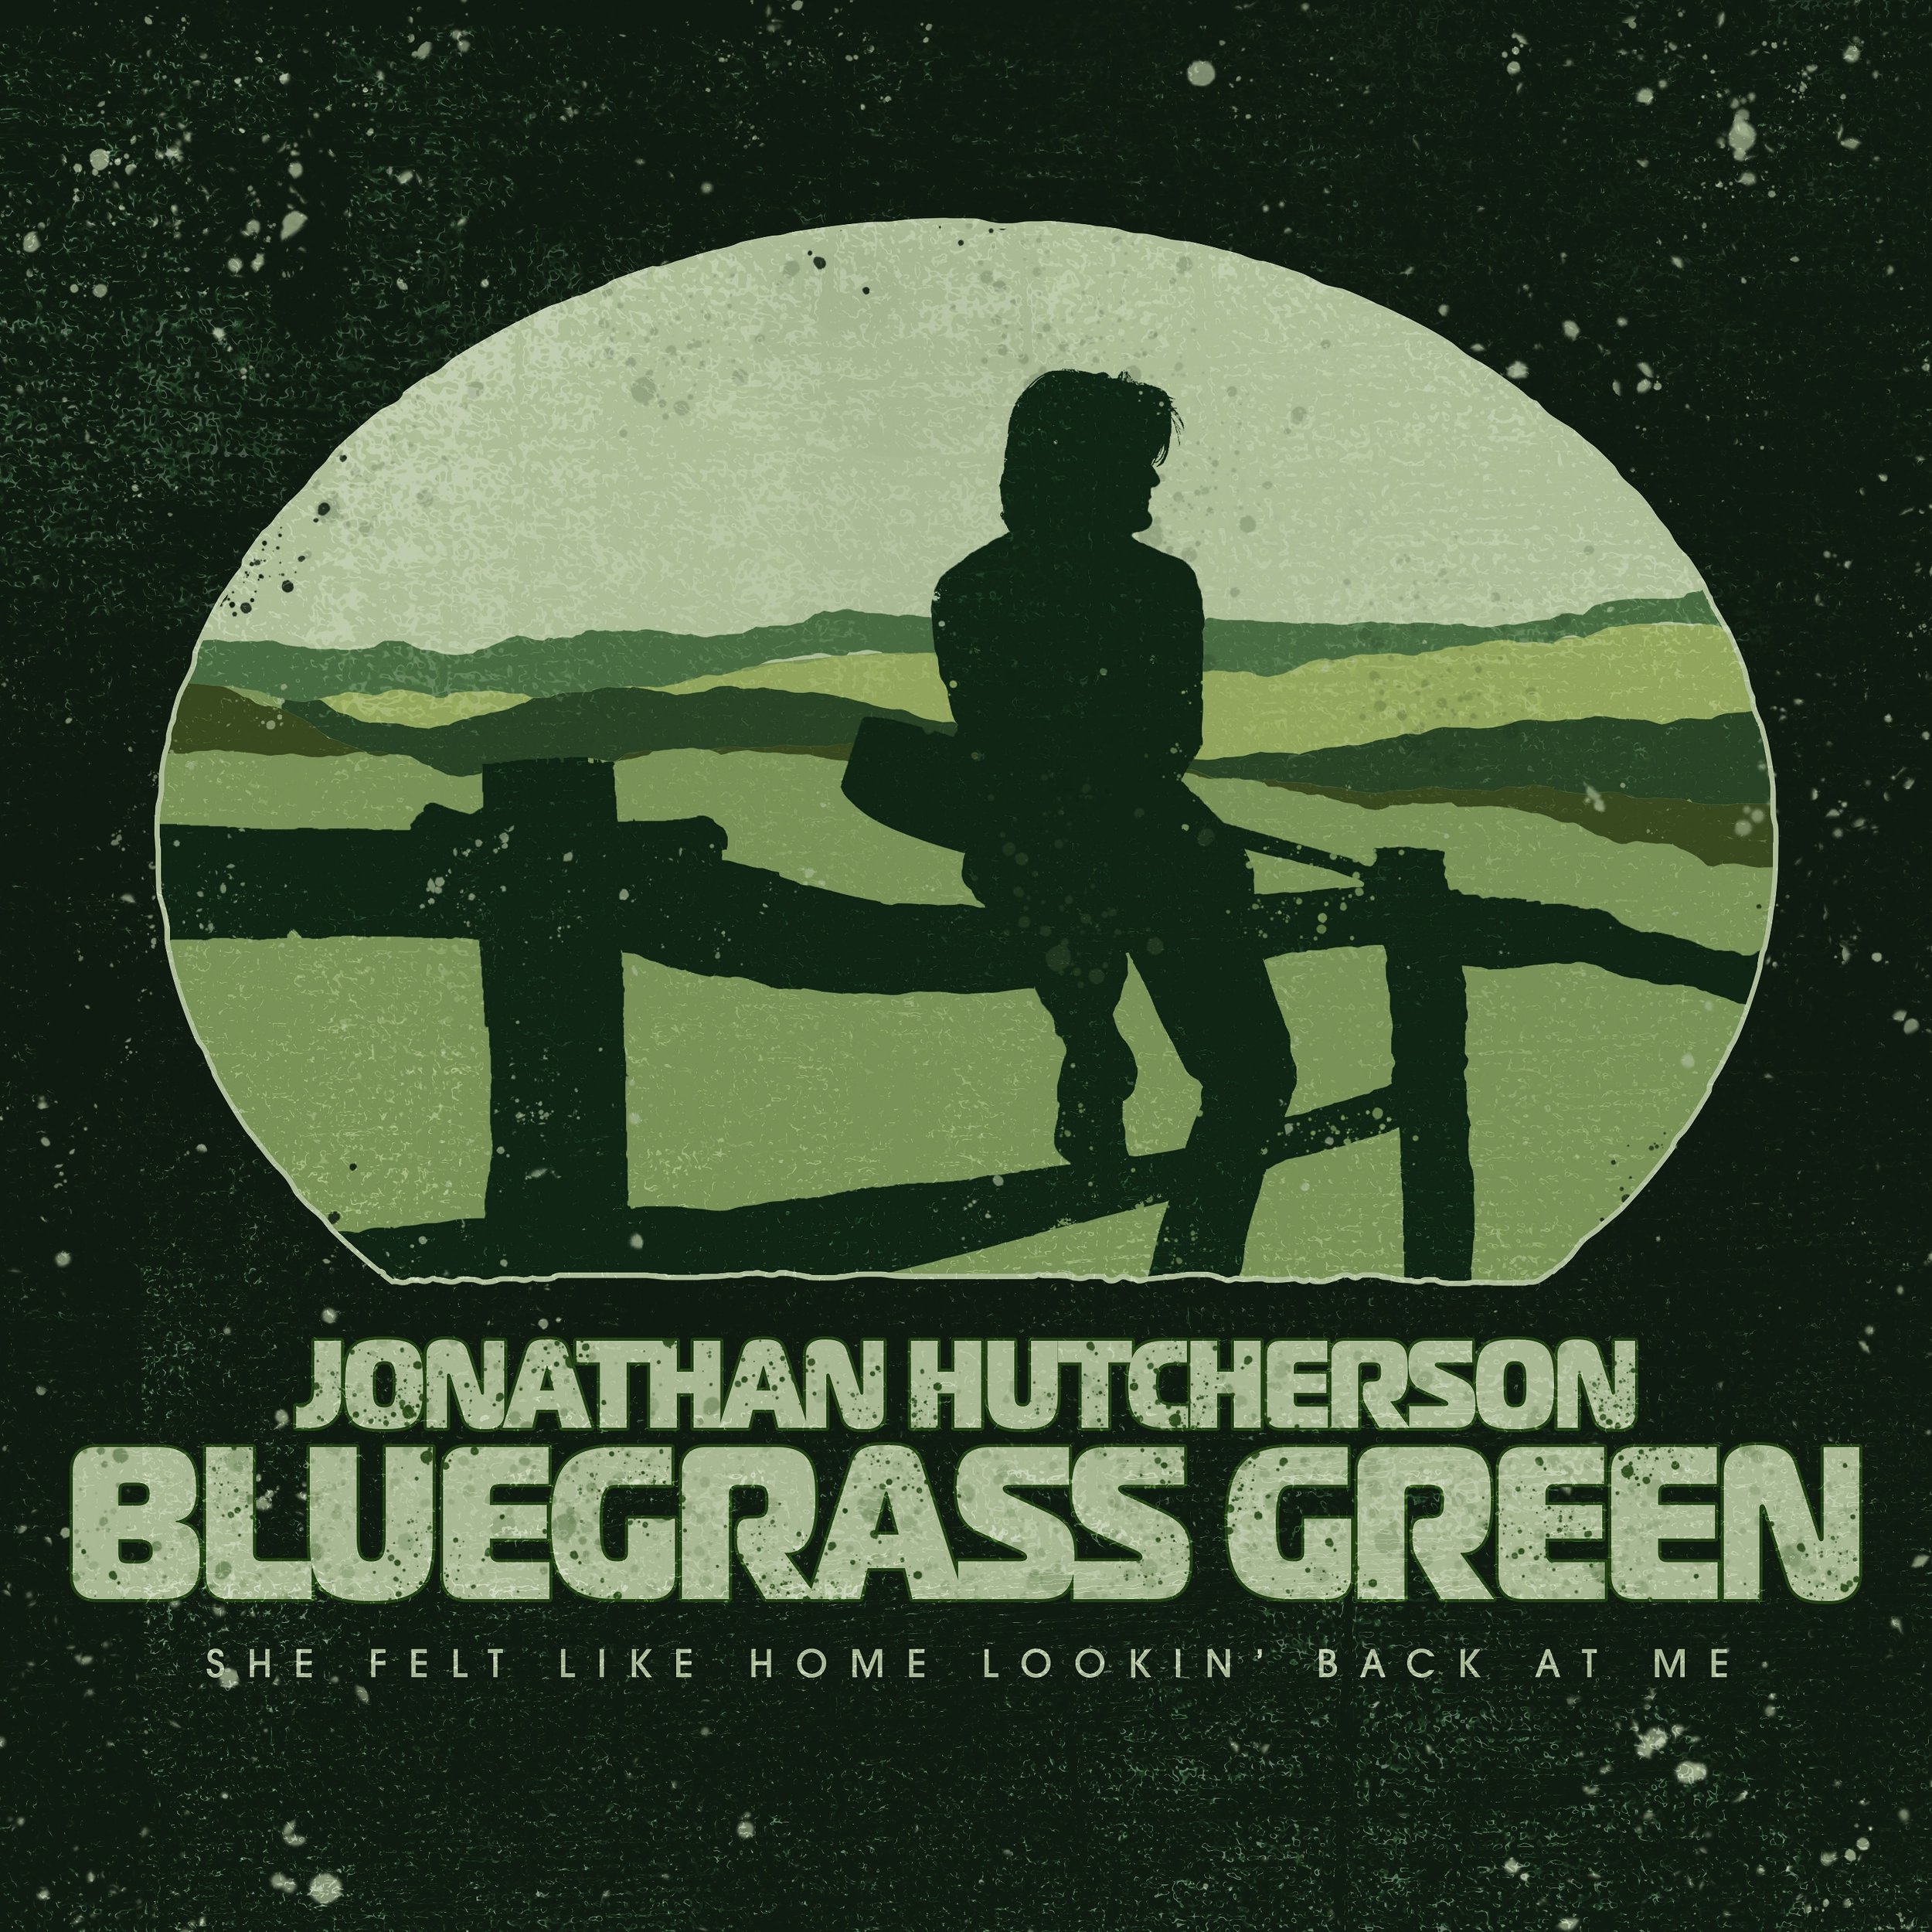 &ldquo;Bluegrass Green&rdquo; coming out Friday. This song&rsquo;s got my Kentucky roots all over it. Pumped to finally give this one to y&rsquo;all. Pre-save link in bio